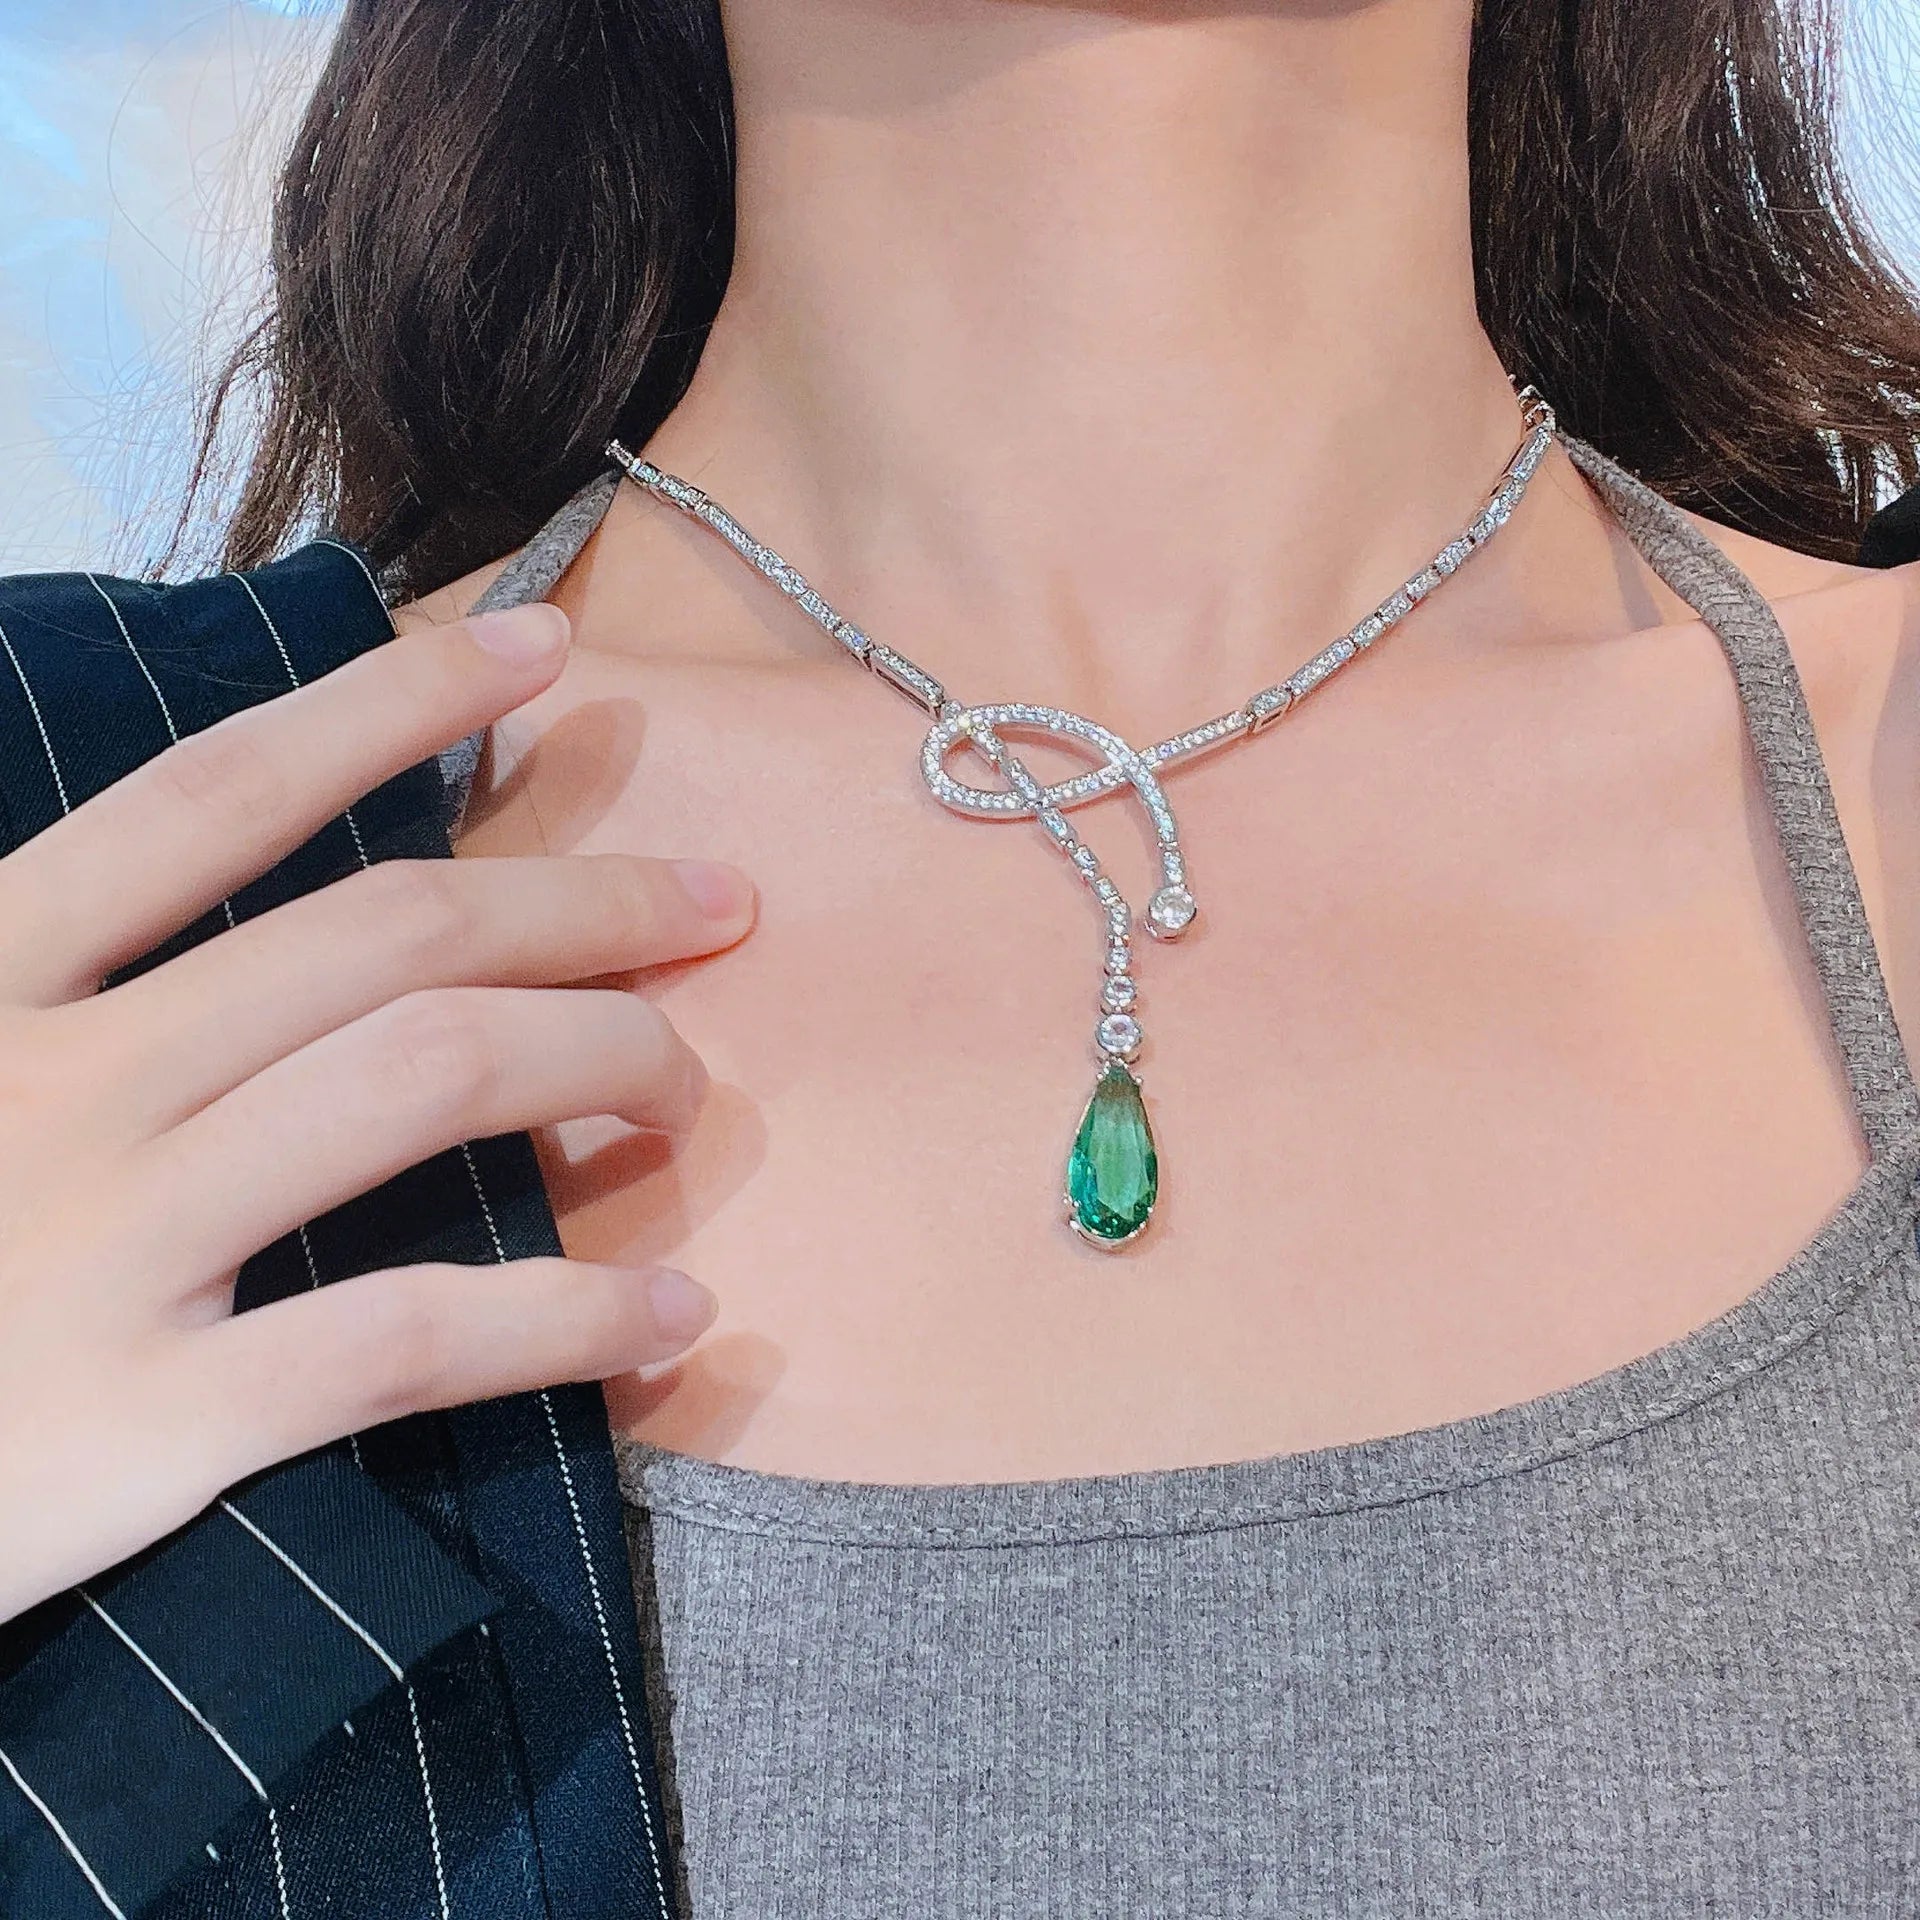 Pear-shaped Emerald Pendant Necklaces with Sparkling Water Drop Design